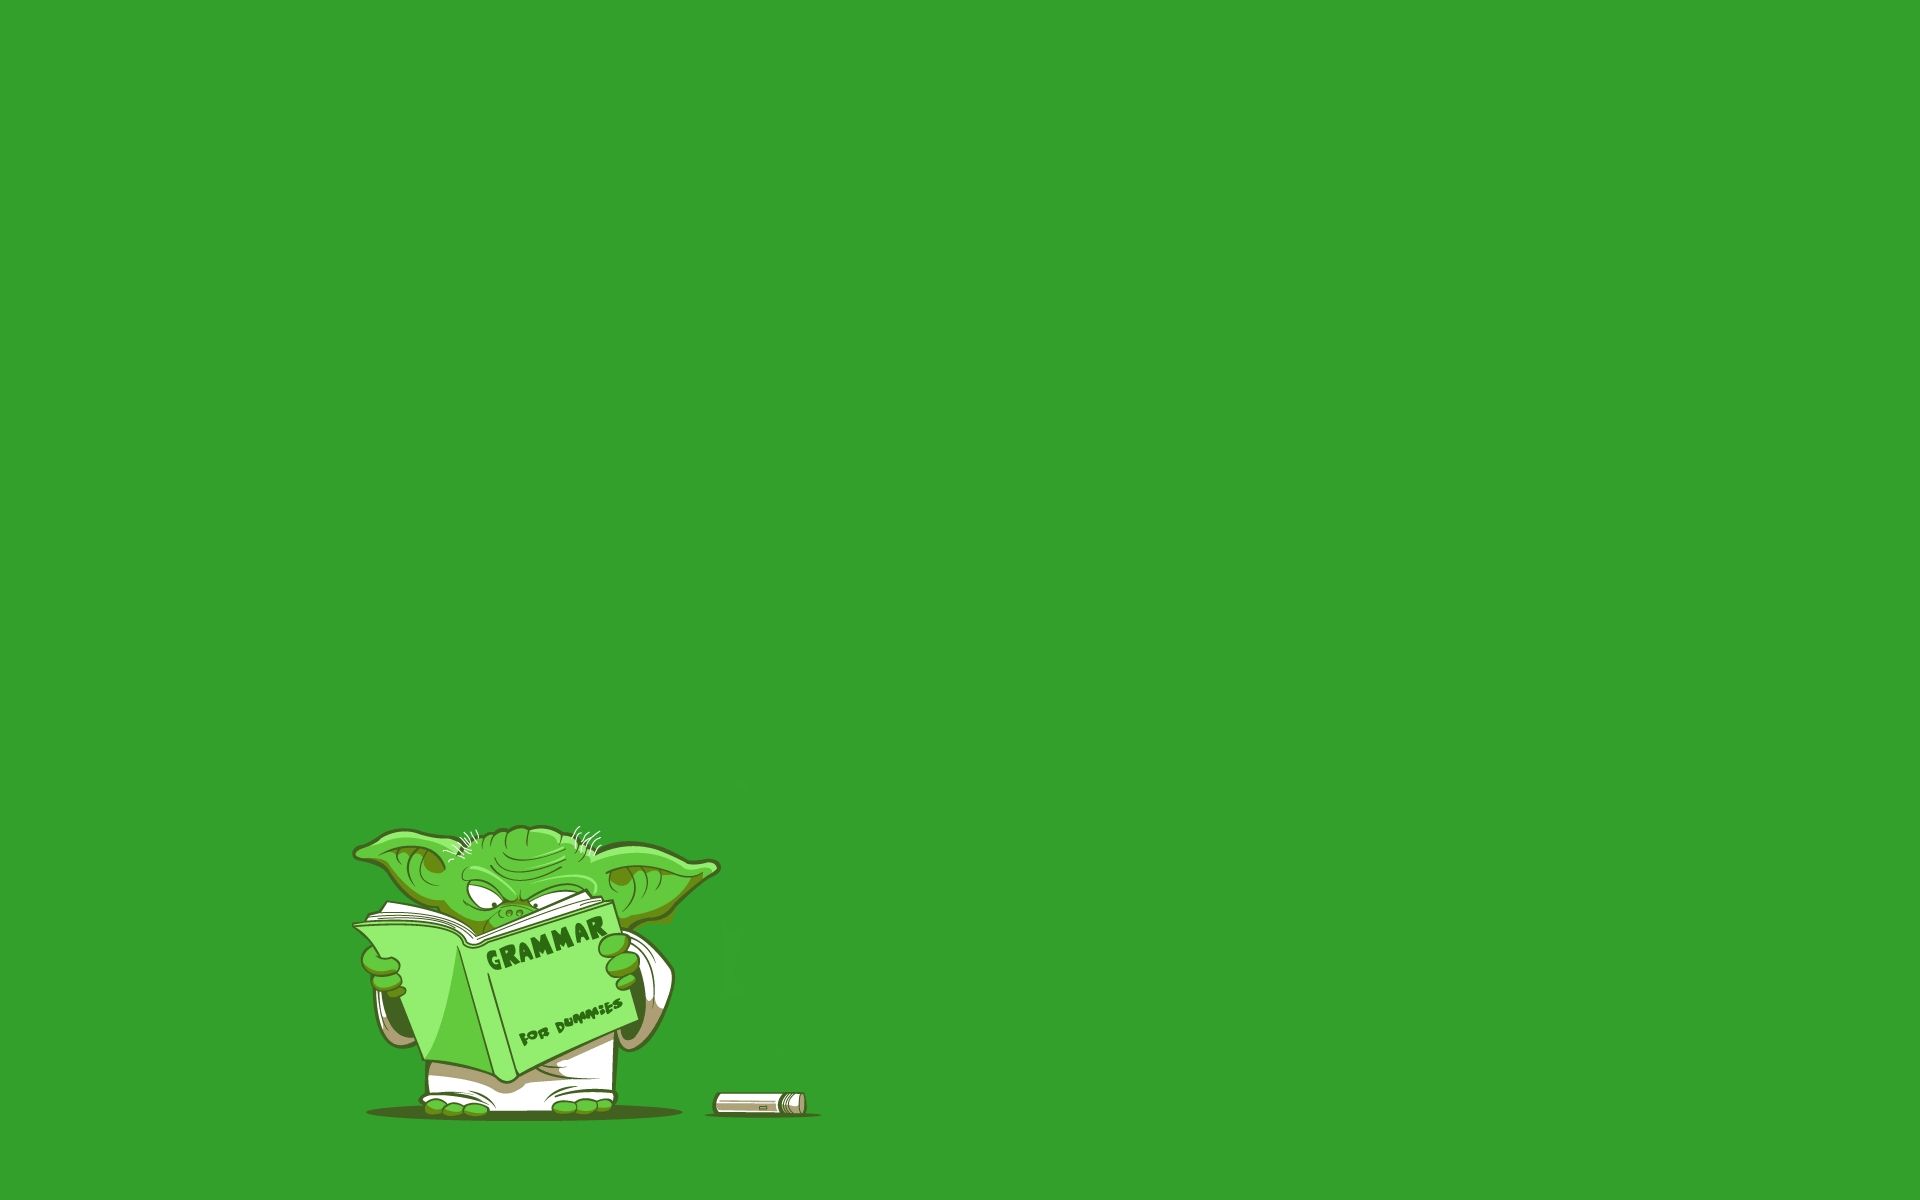 Funny minimalist wallpaper (Part 2 in comments), wallpaper. Yoda wallpaper, Star wars wallpaper, Star wars humor